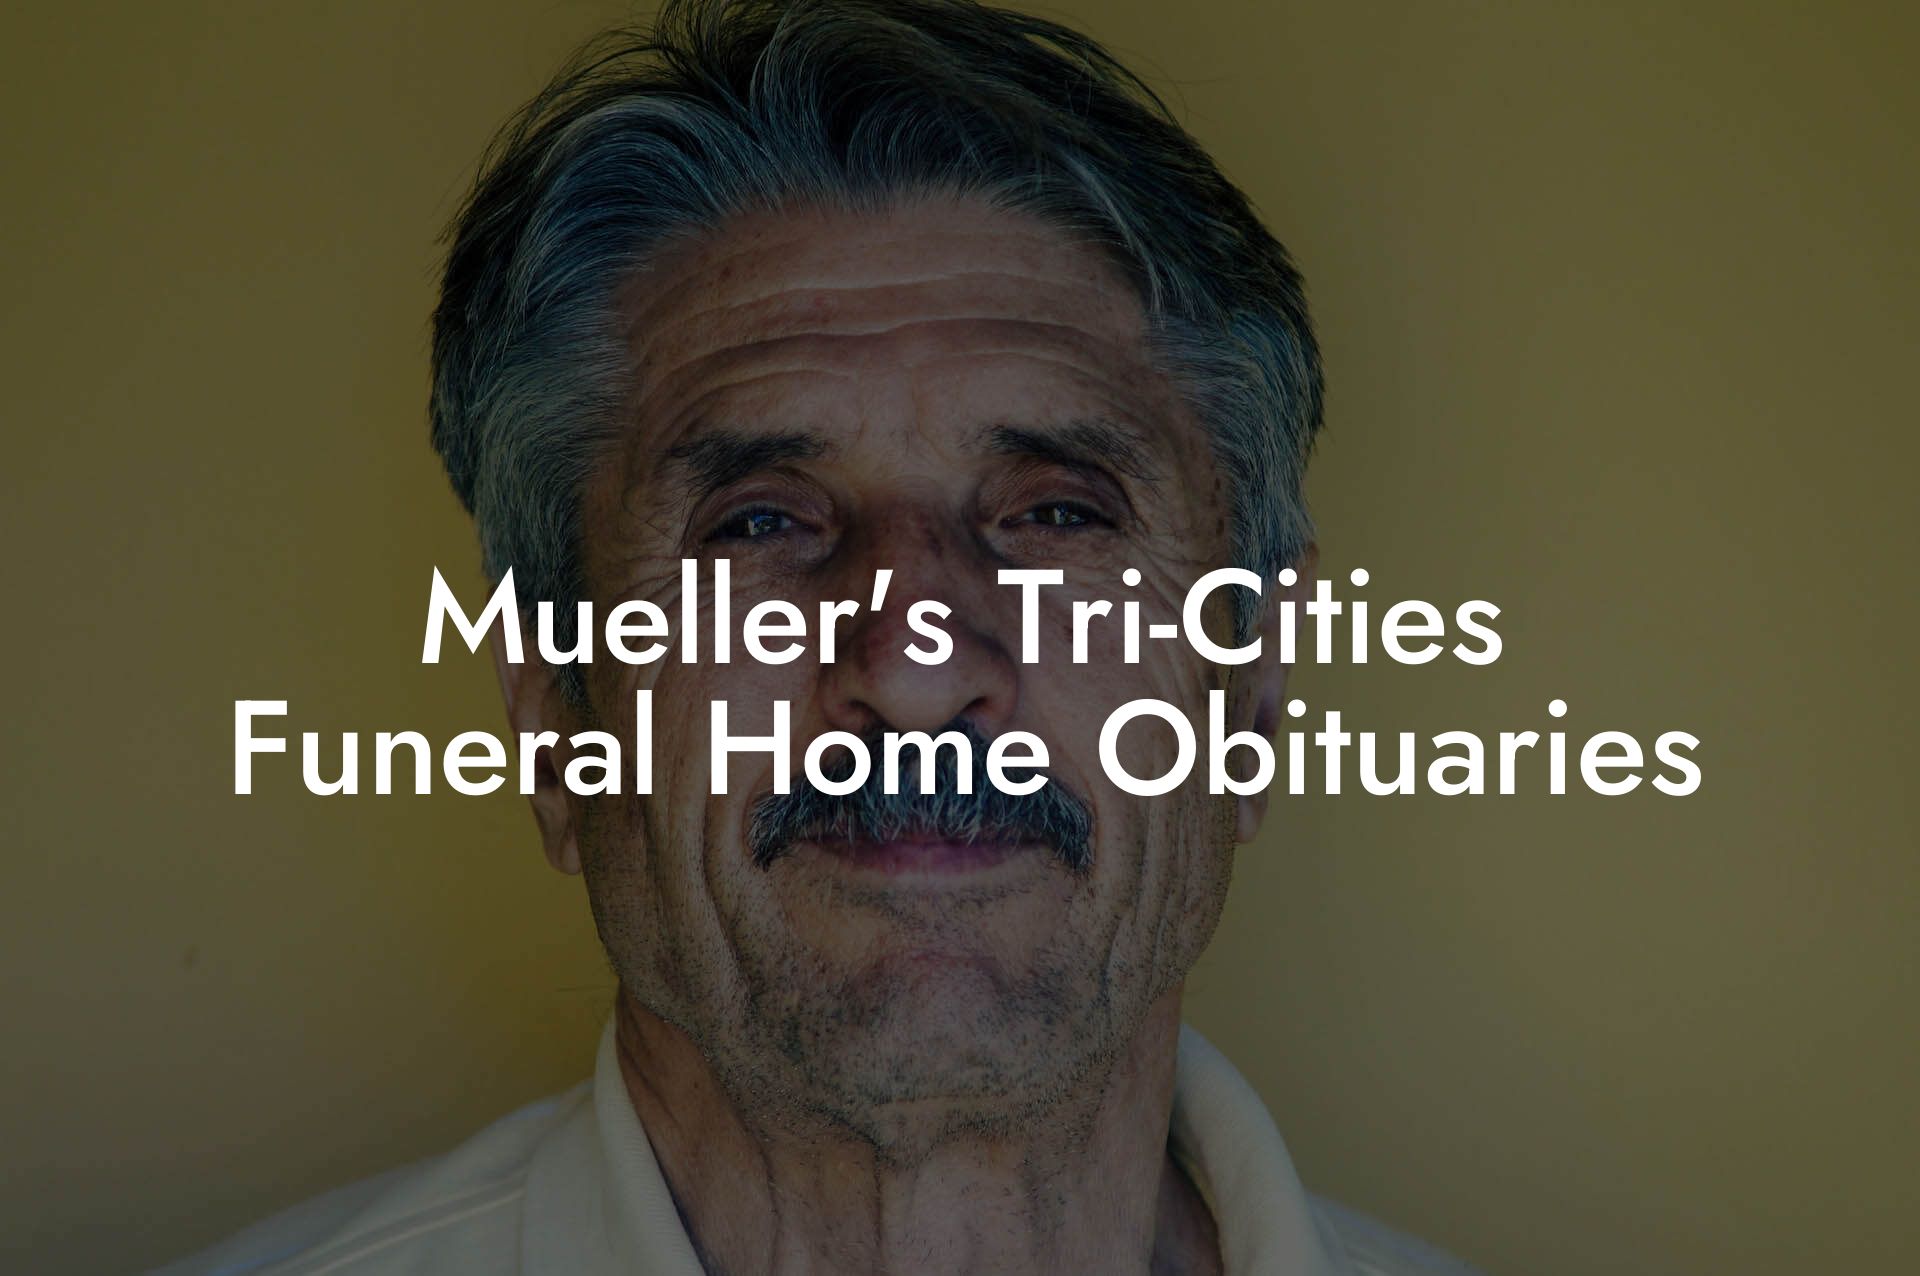 Mueller's Tri-Cities Funeral Home Obituaries